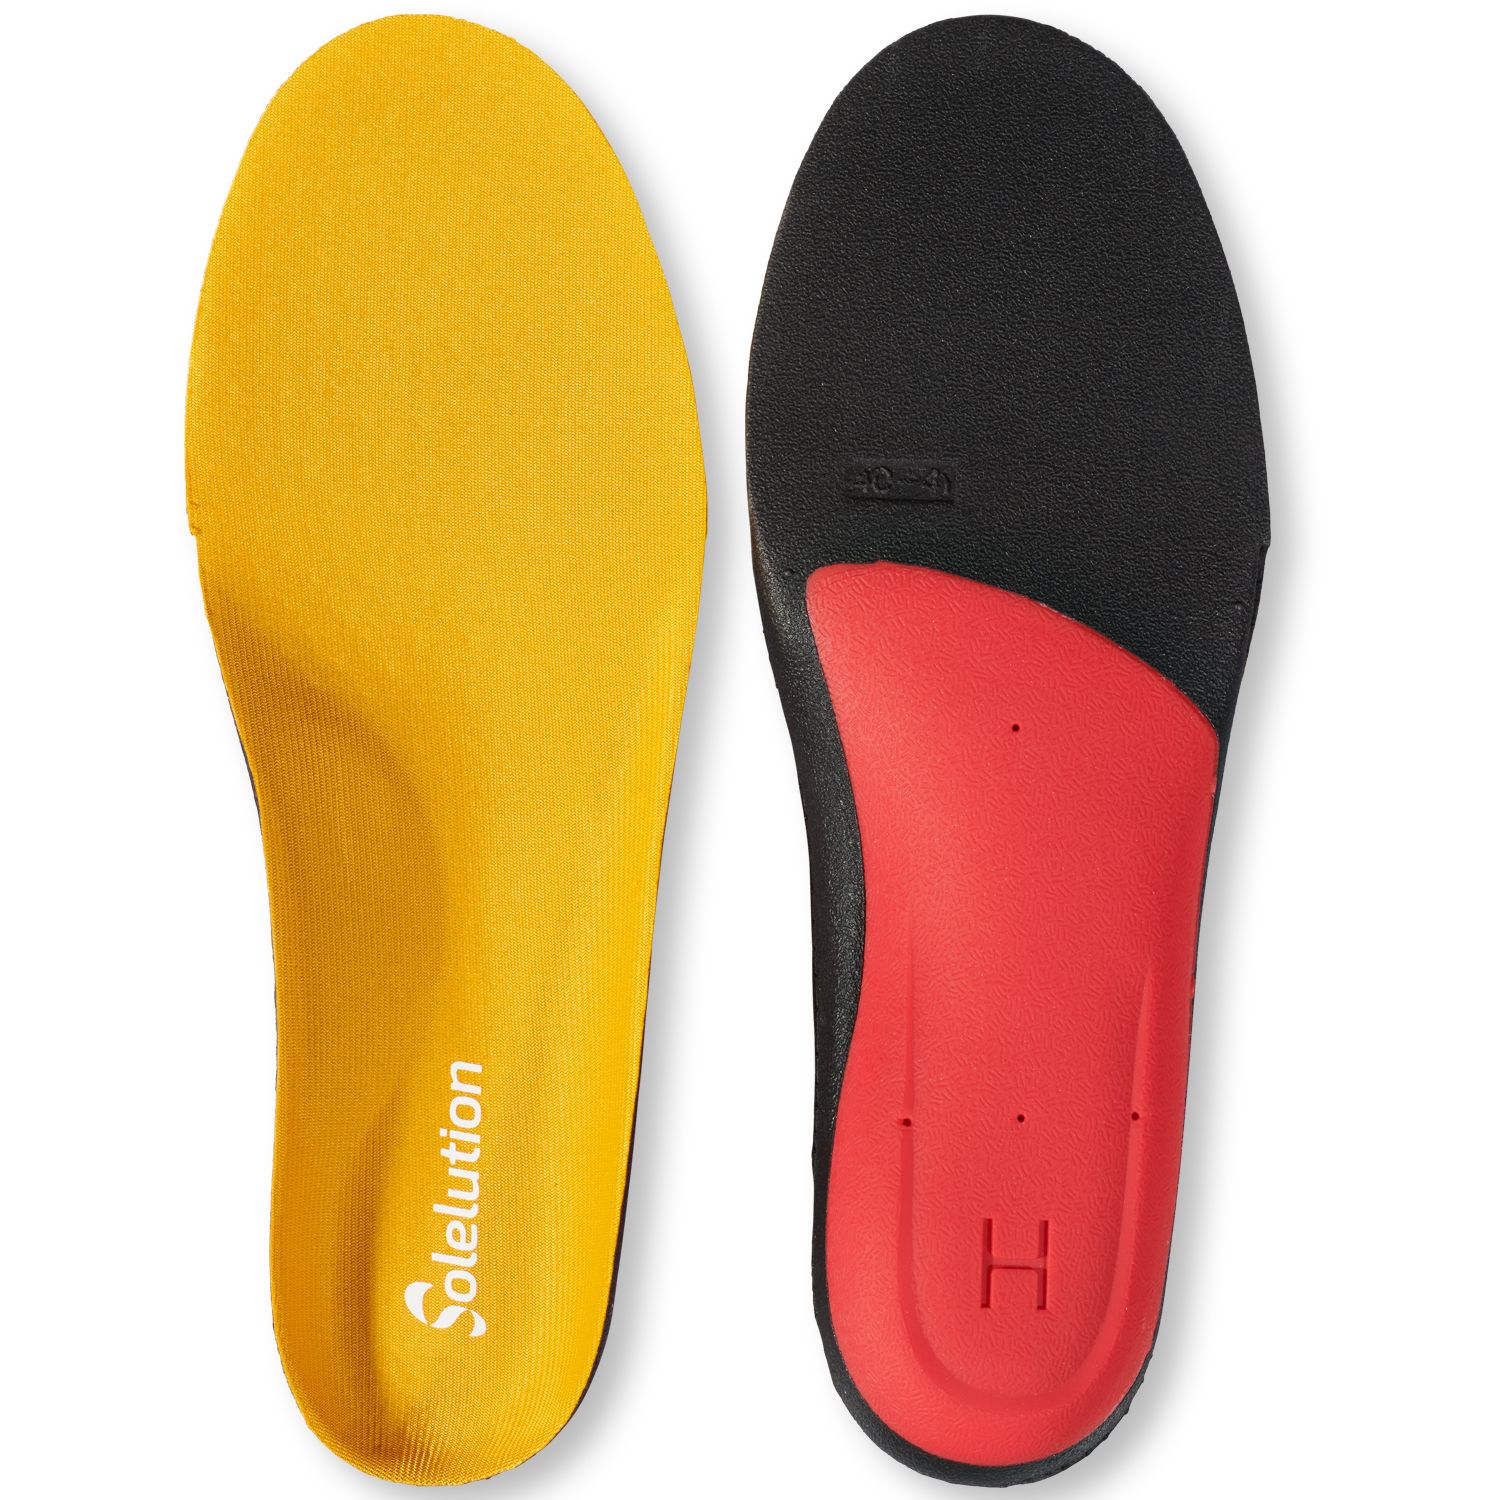 solelution high arch orthotics pair bottom and top view